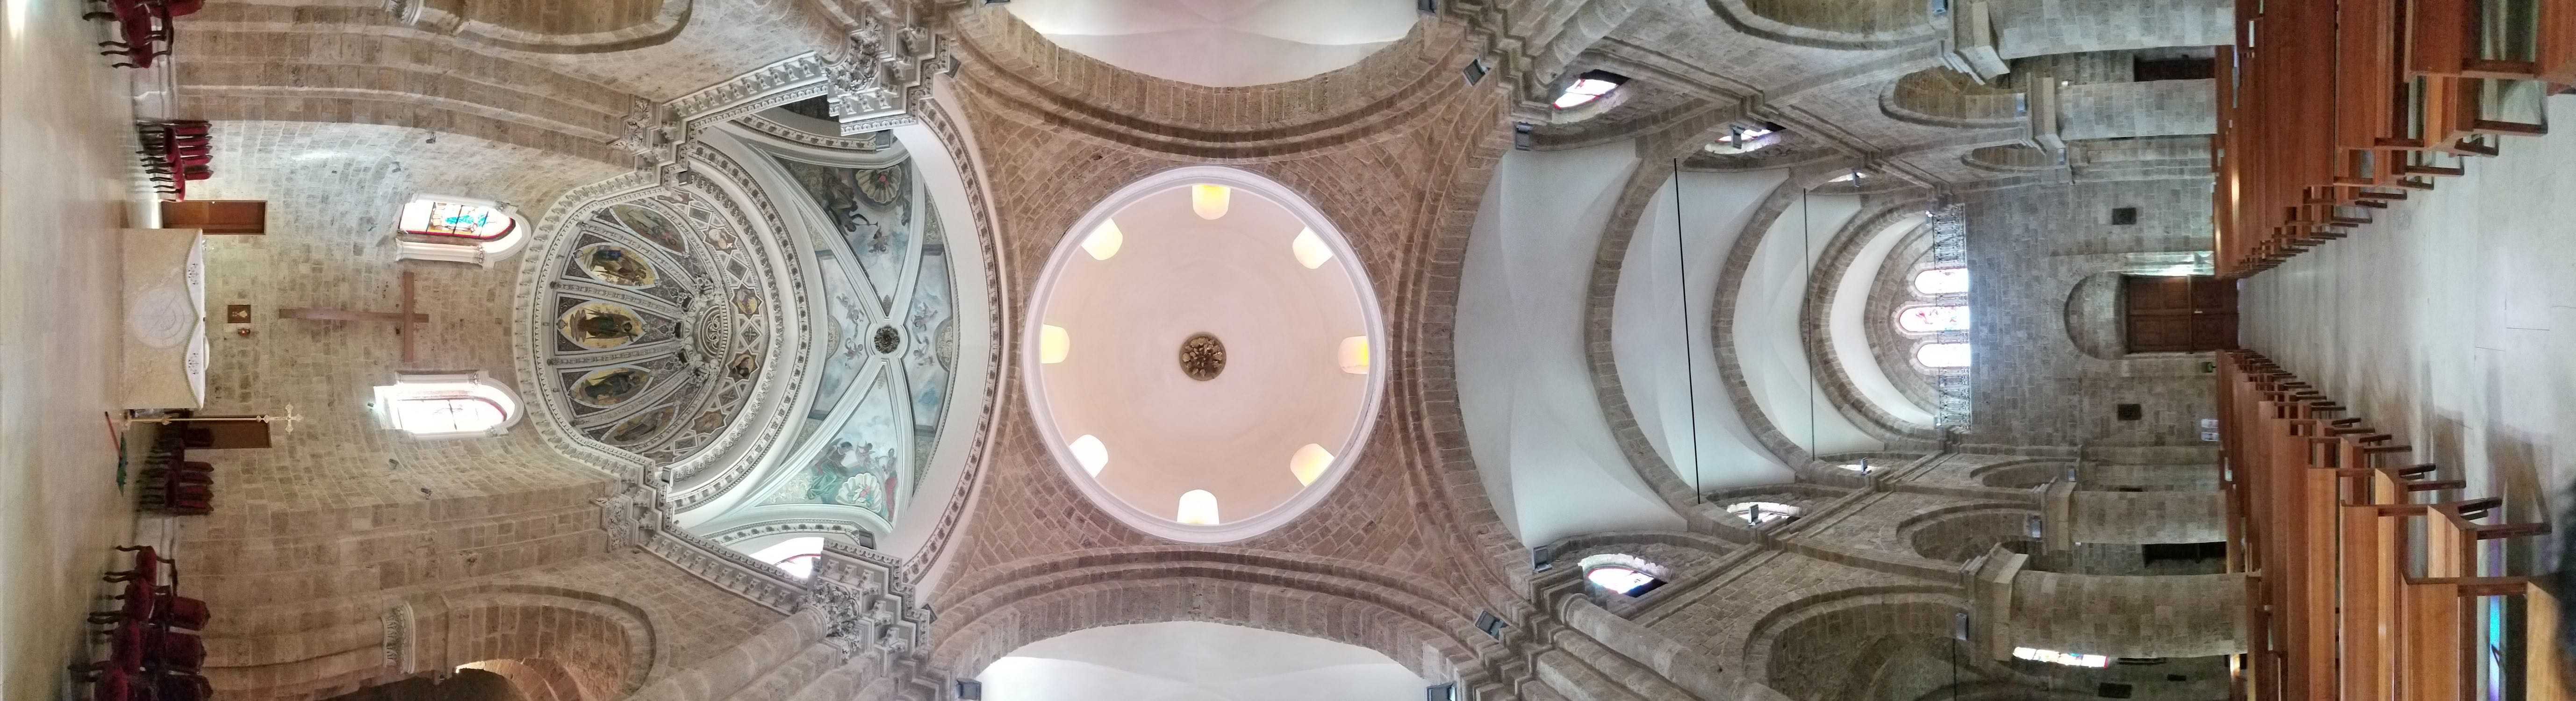 Panoramic view of interior, showing nave and ceiling.